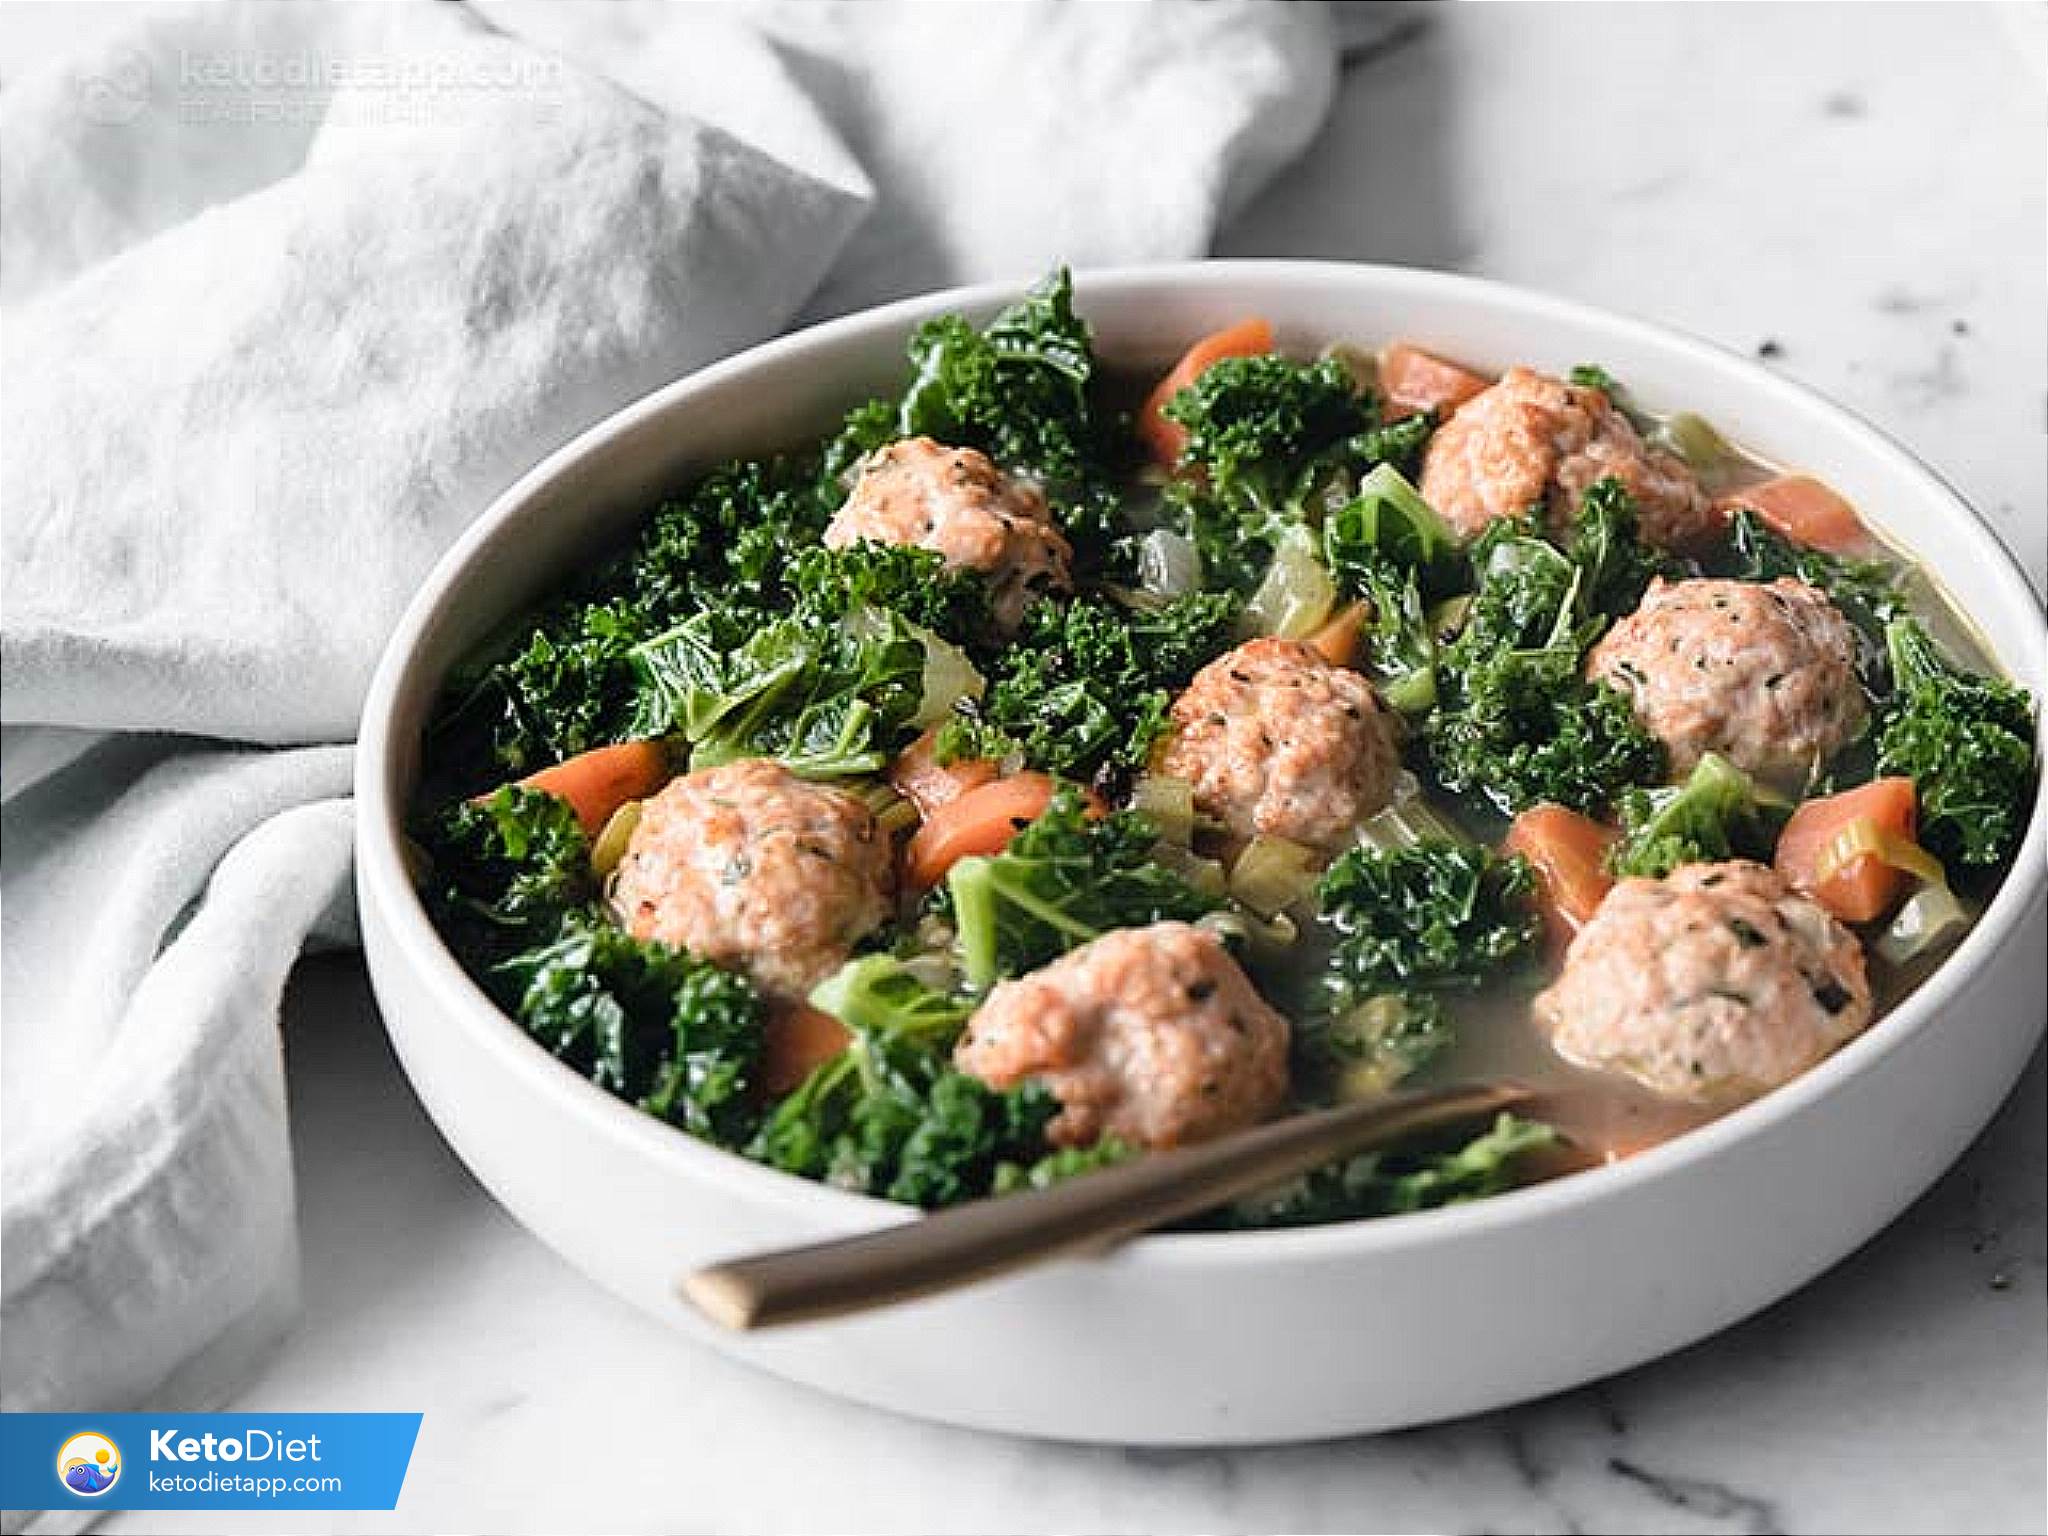 Healthy Soul Food Chicken Meatball Soup | KetoDiet Blog